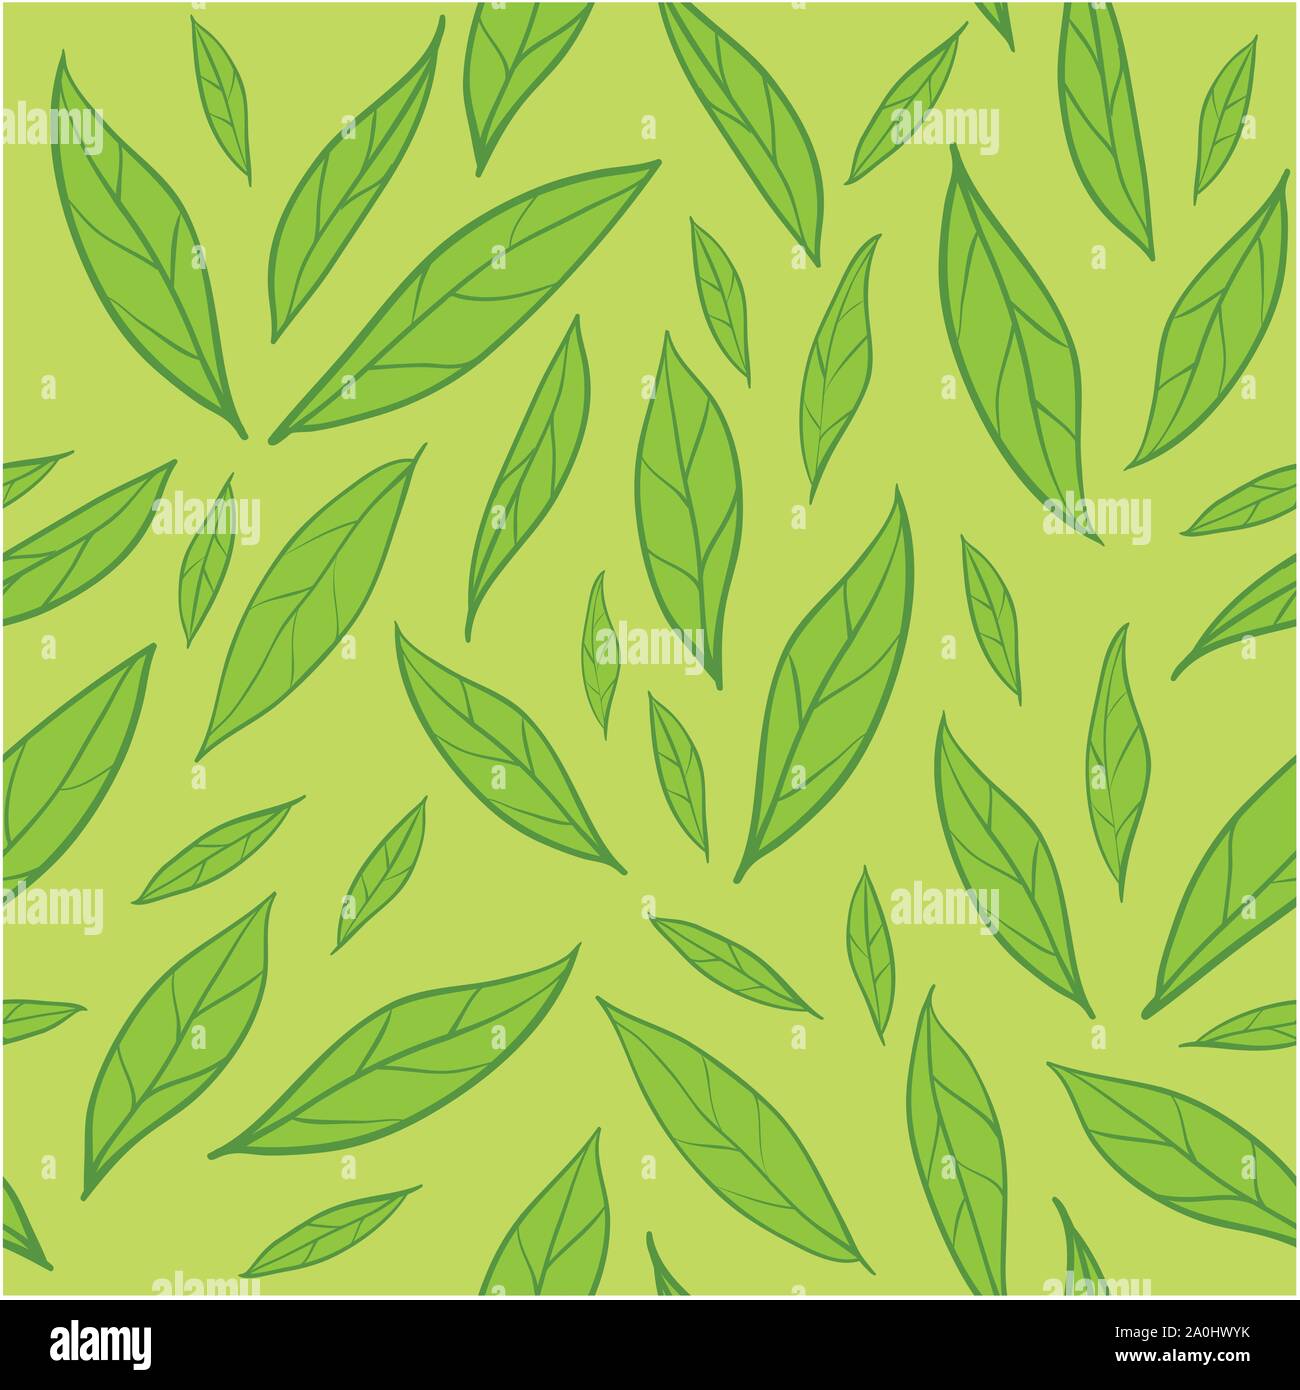 Seamless pattern with green leaves Stock Vector